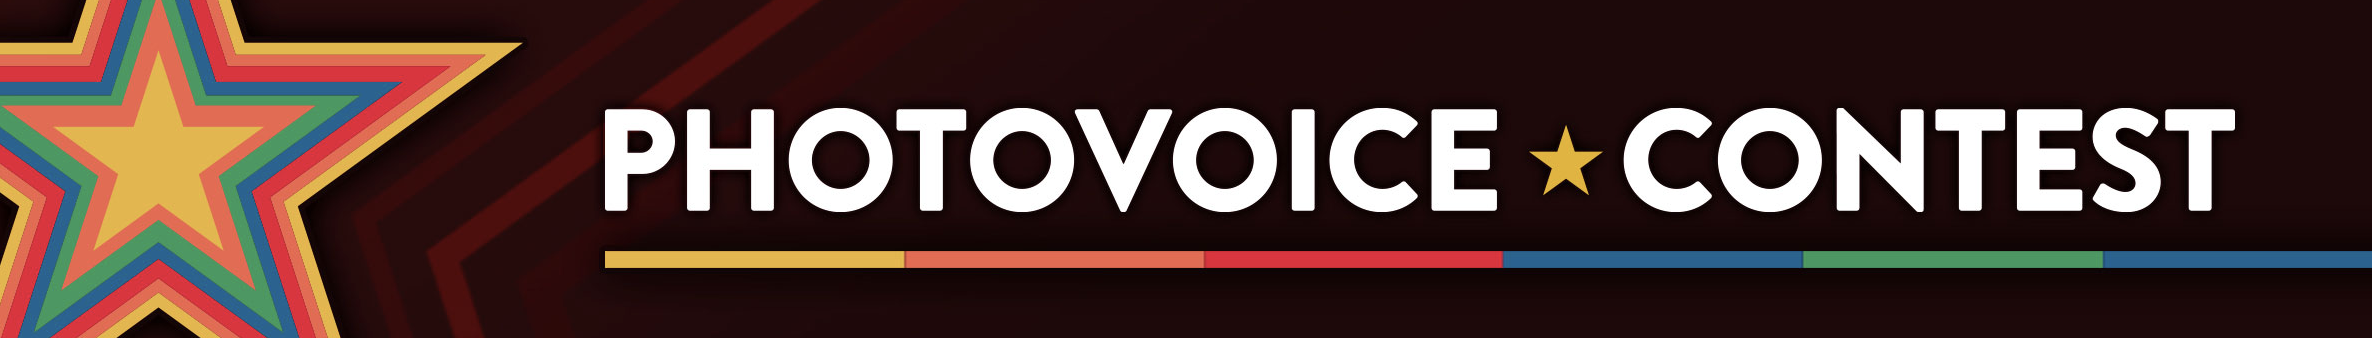 Visual with text that reads "Photovoice Contest" in Texas State branding